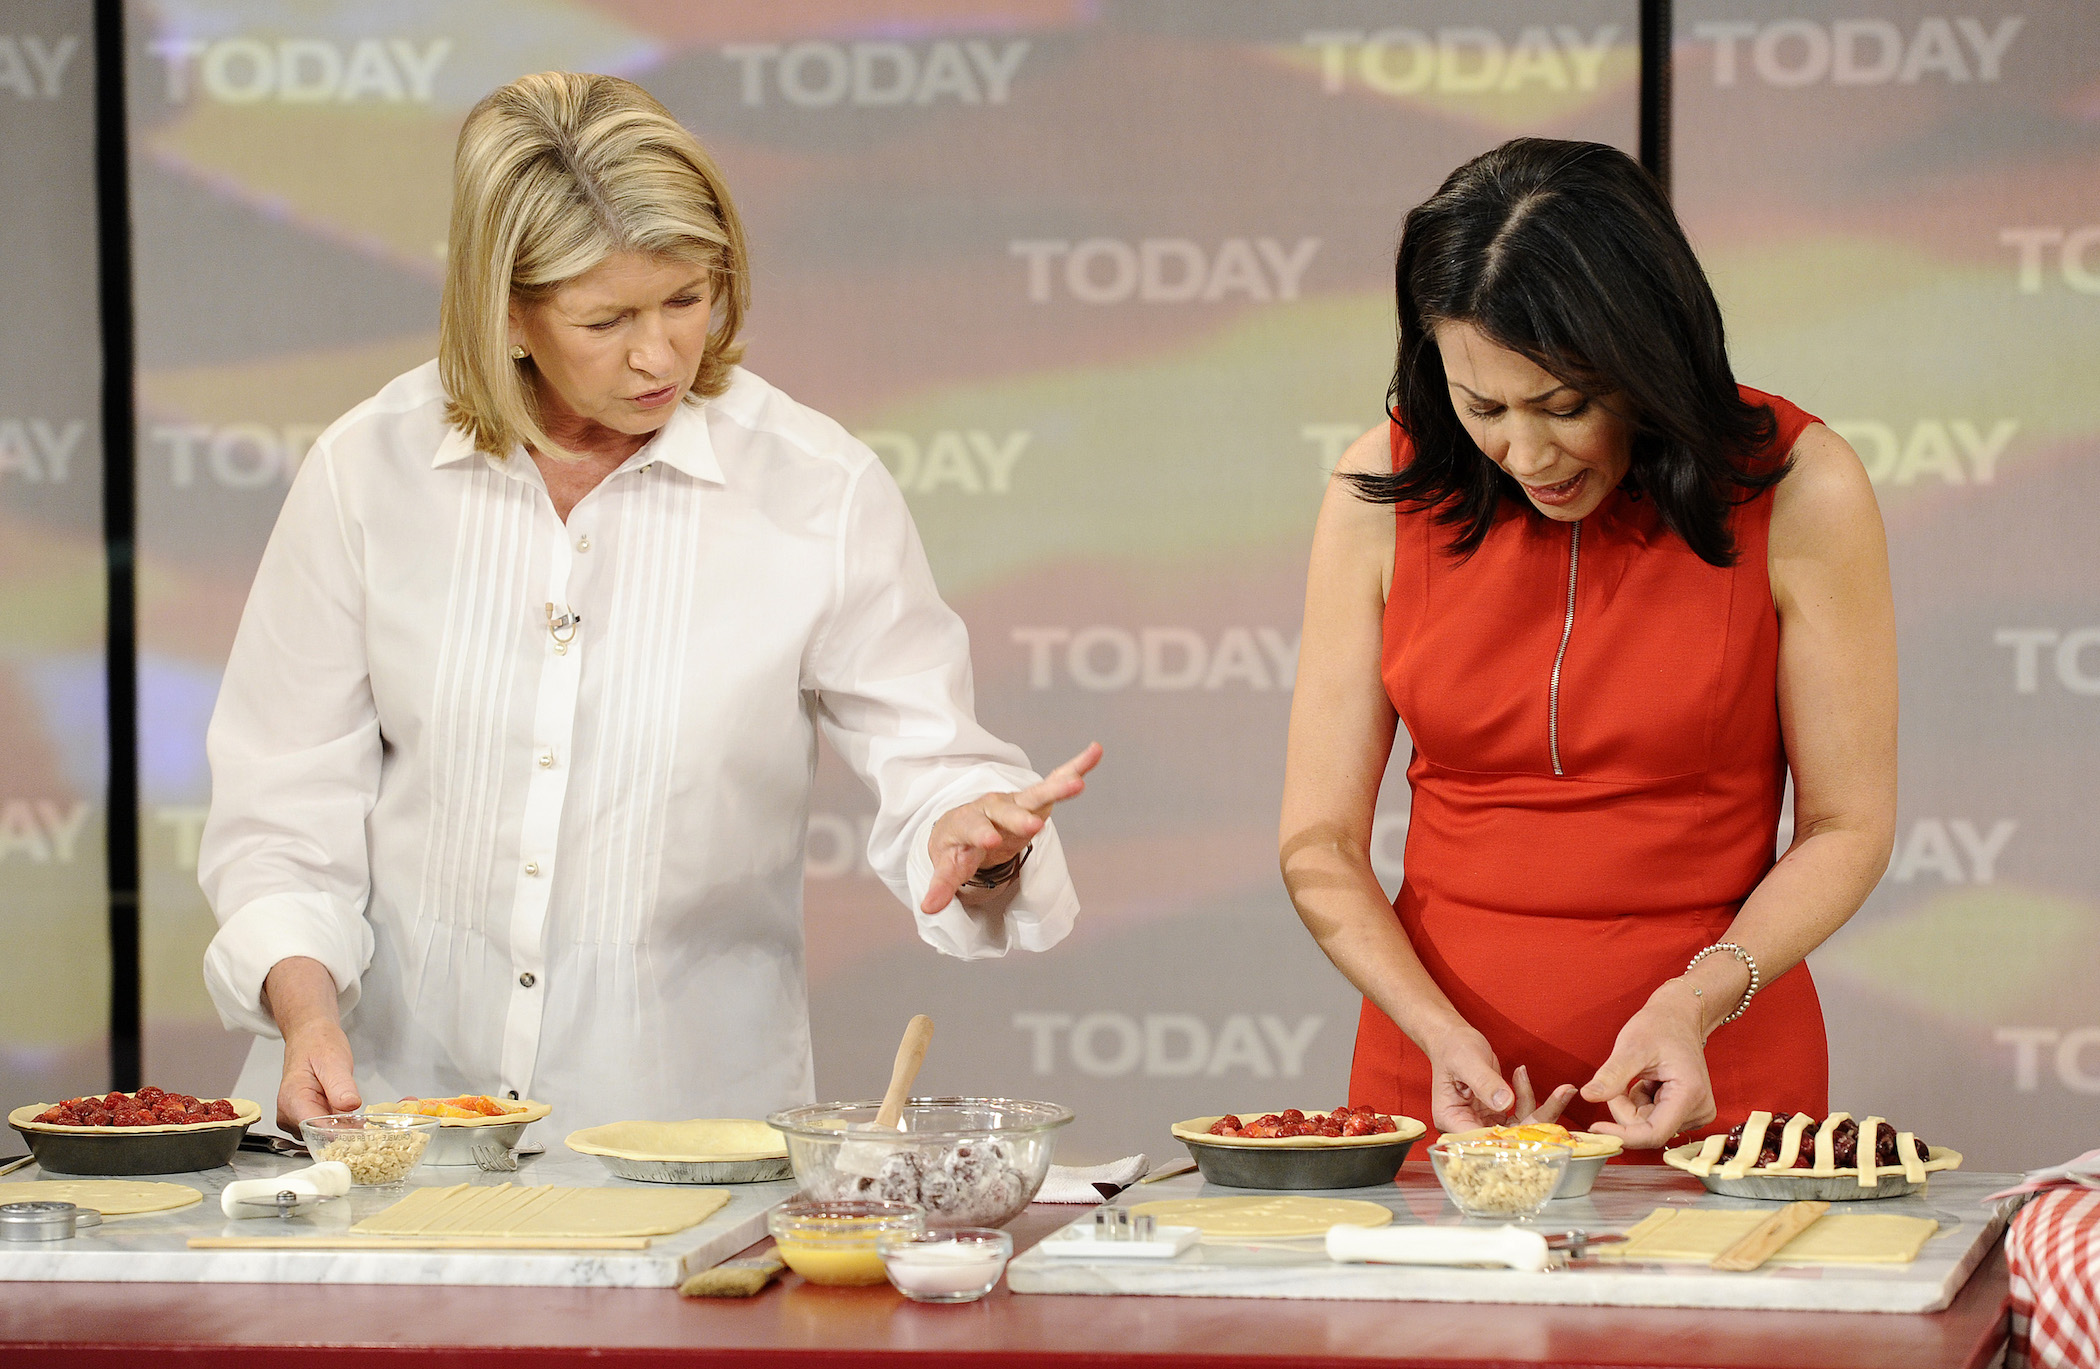 Martha Stewart and Ann Curry cooking some of Martha Stewart's recipes on the 'Today' show